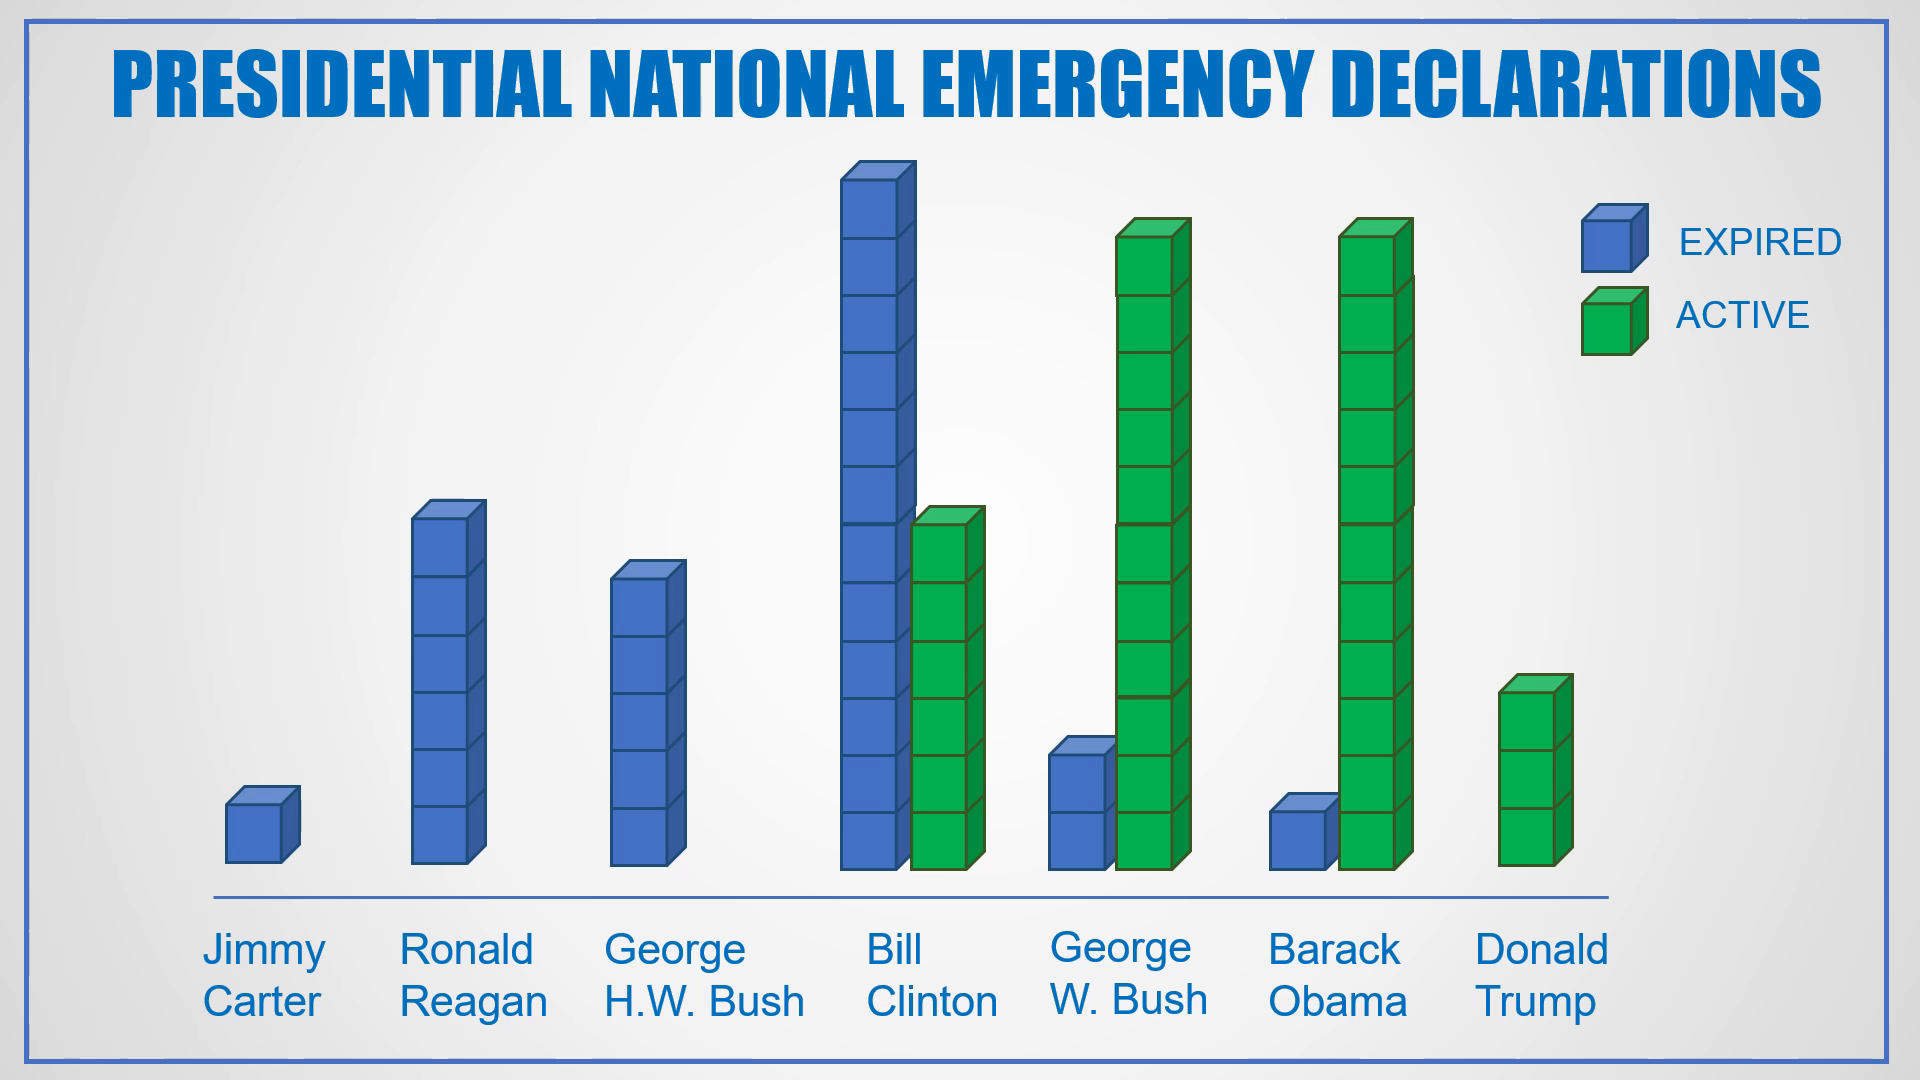 Since 1976, U.S. presidents have declared 59 national emergencies. See which presidents have used the law the most.